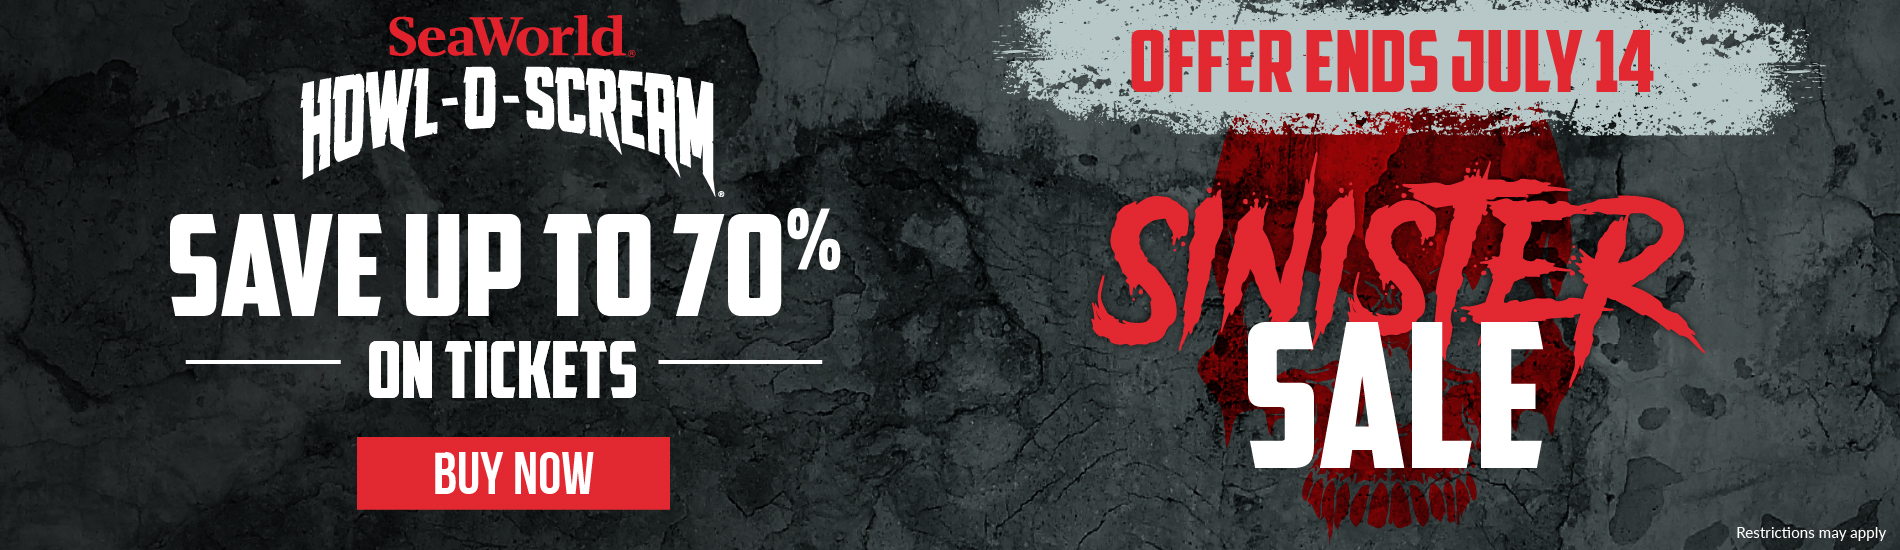 Save up to 70% on tickets